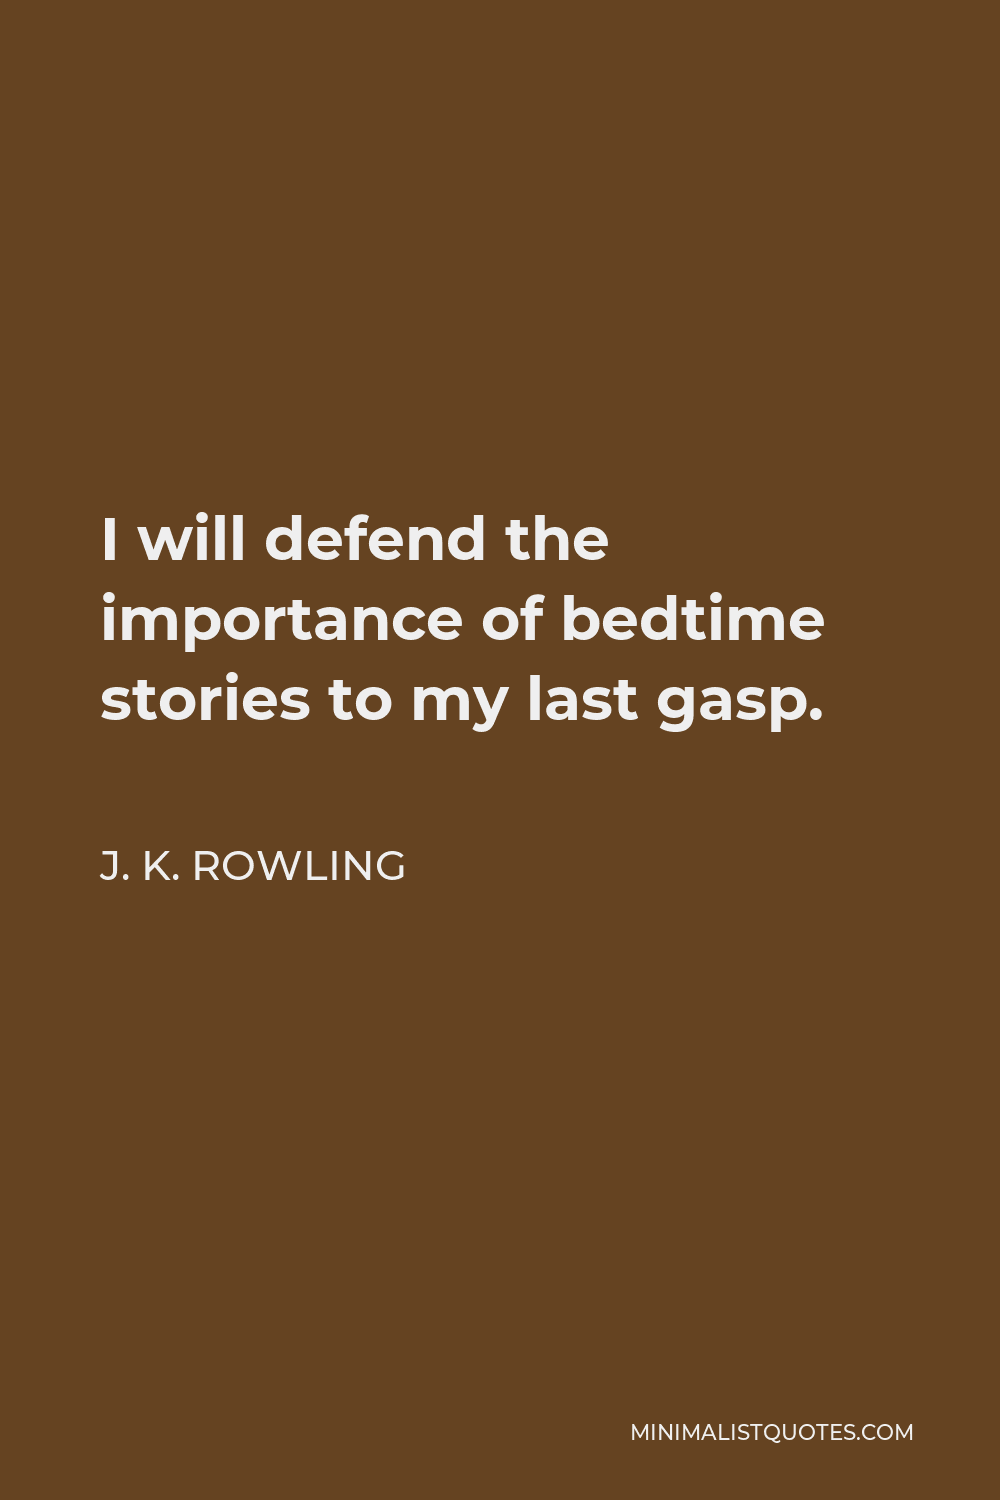 J. K. Rowling Quote - I will defend the importance of bedtime stories to my last gasp.